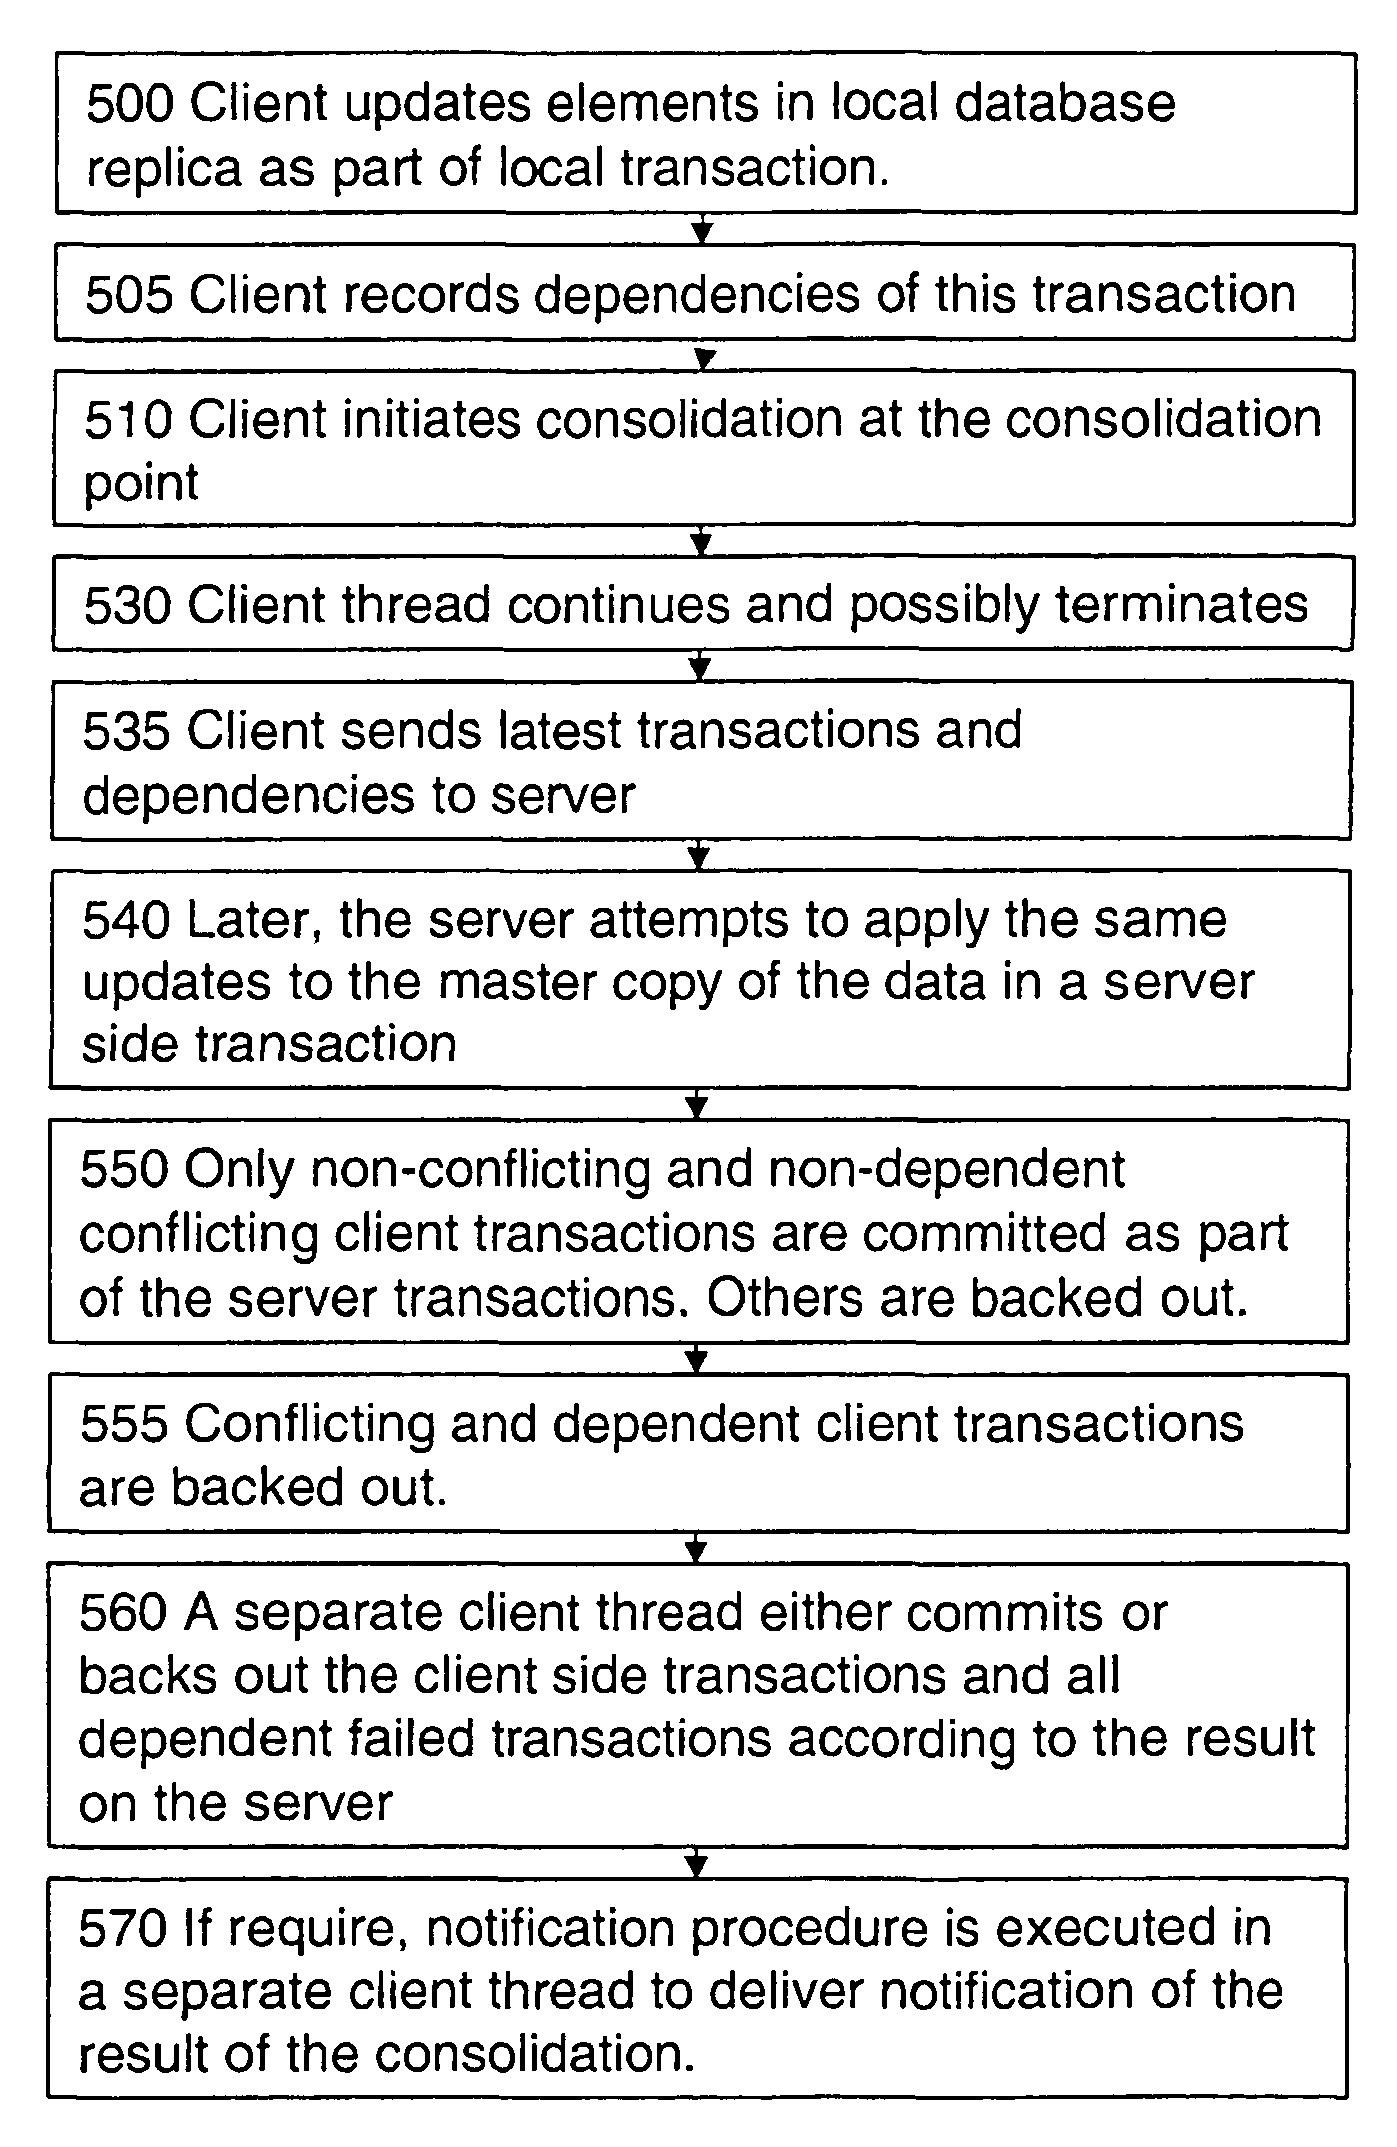 Commitment chains for conflict resolution between disconnected data sharing applications